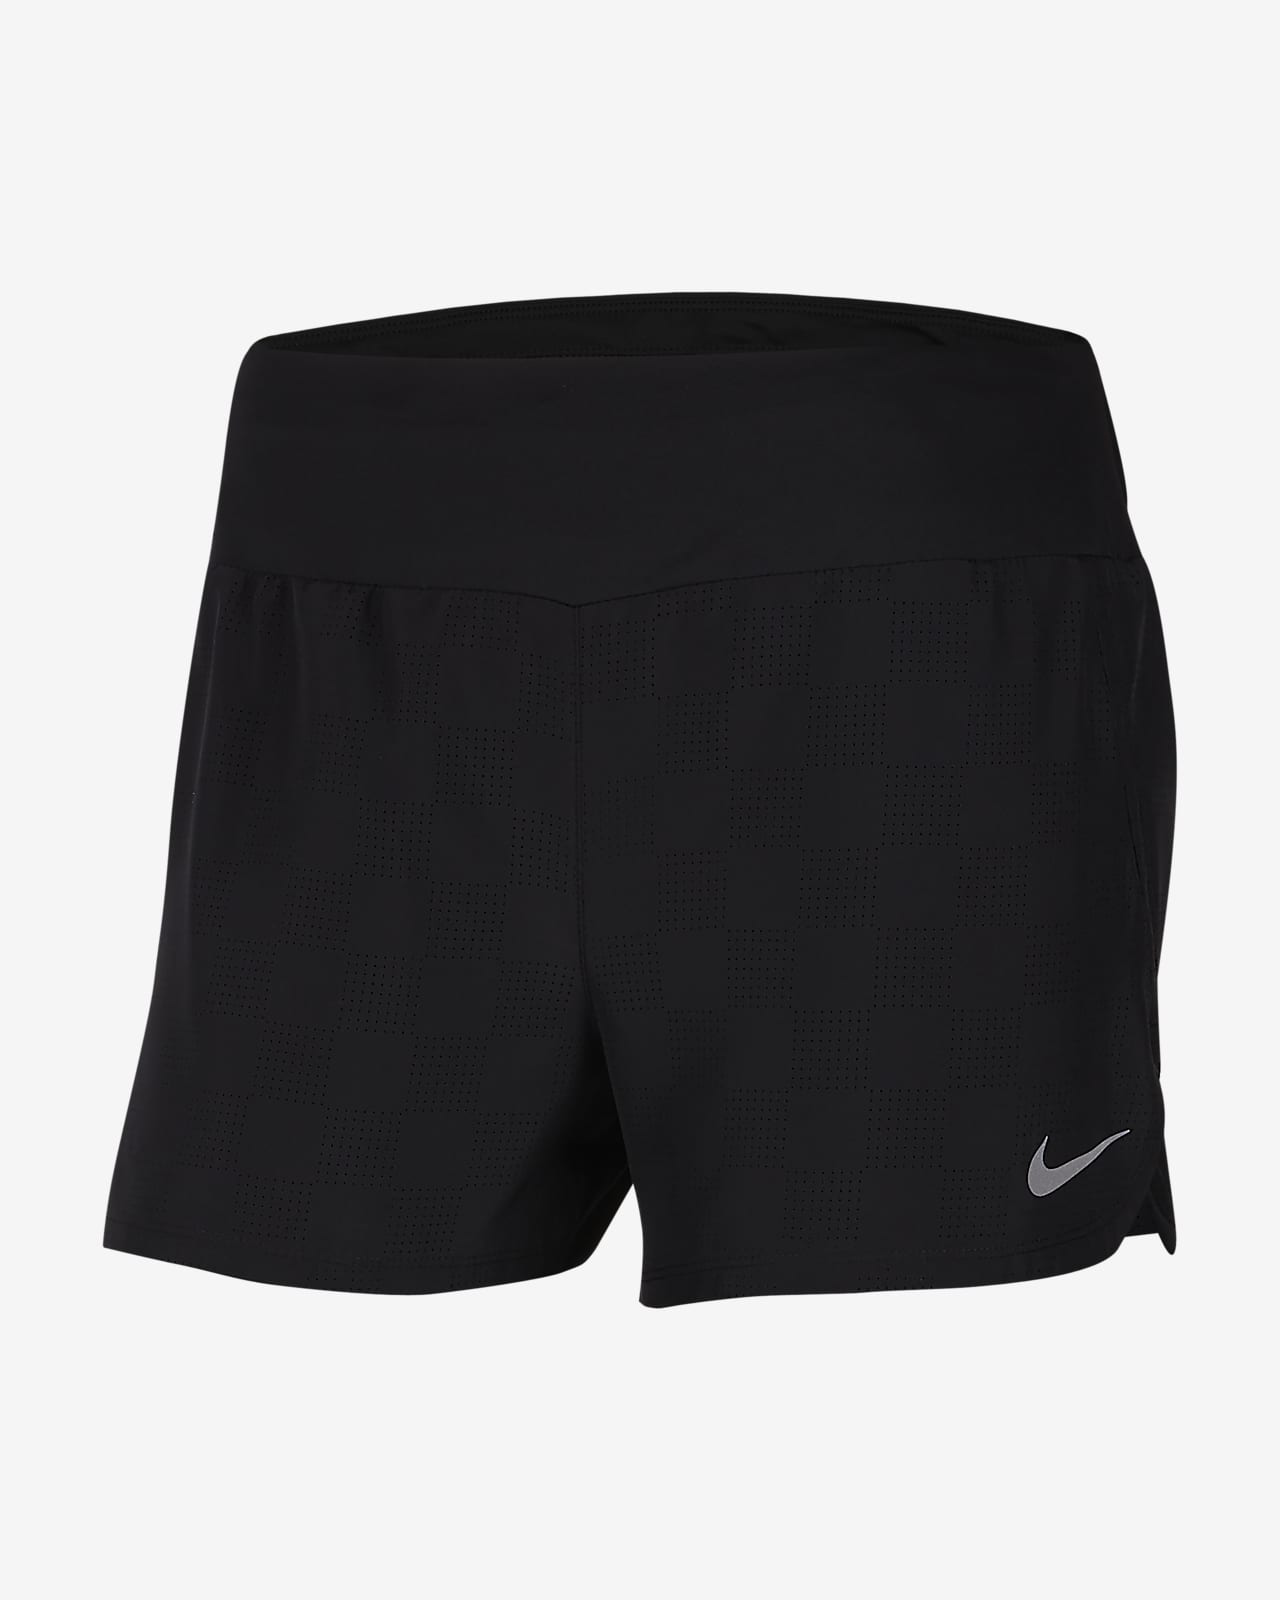 nike clothes on sale womens